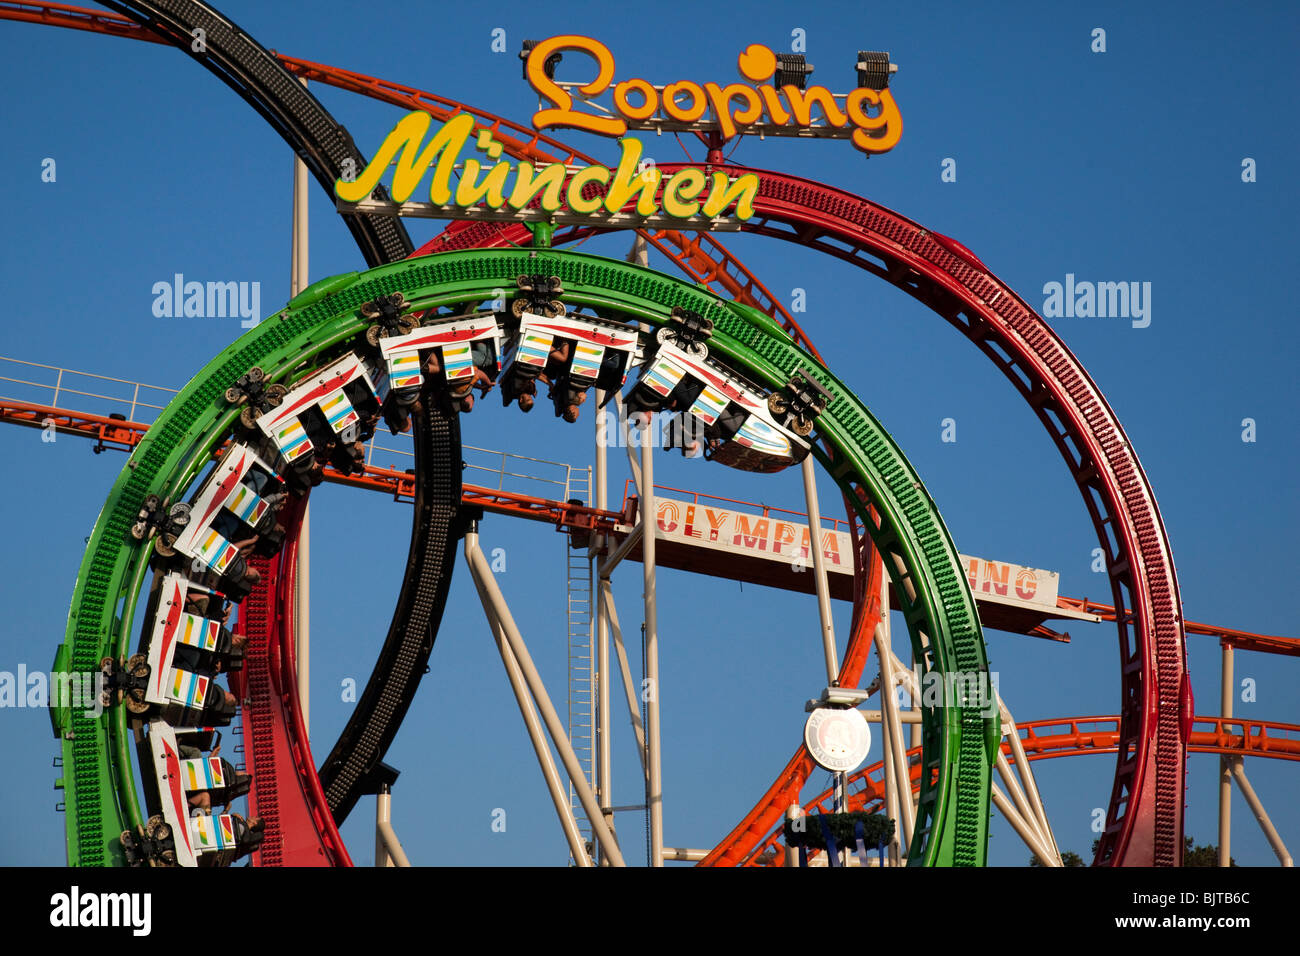 Roller Coaster ride with Looping at Oktoberfest, Munich, Bavaria, Germany, Europe Stock Photo